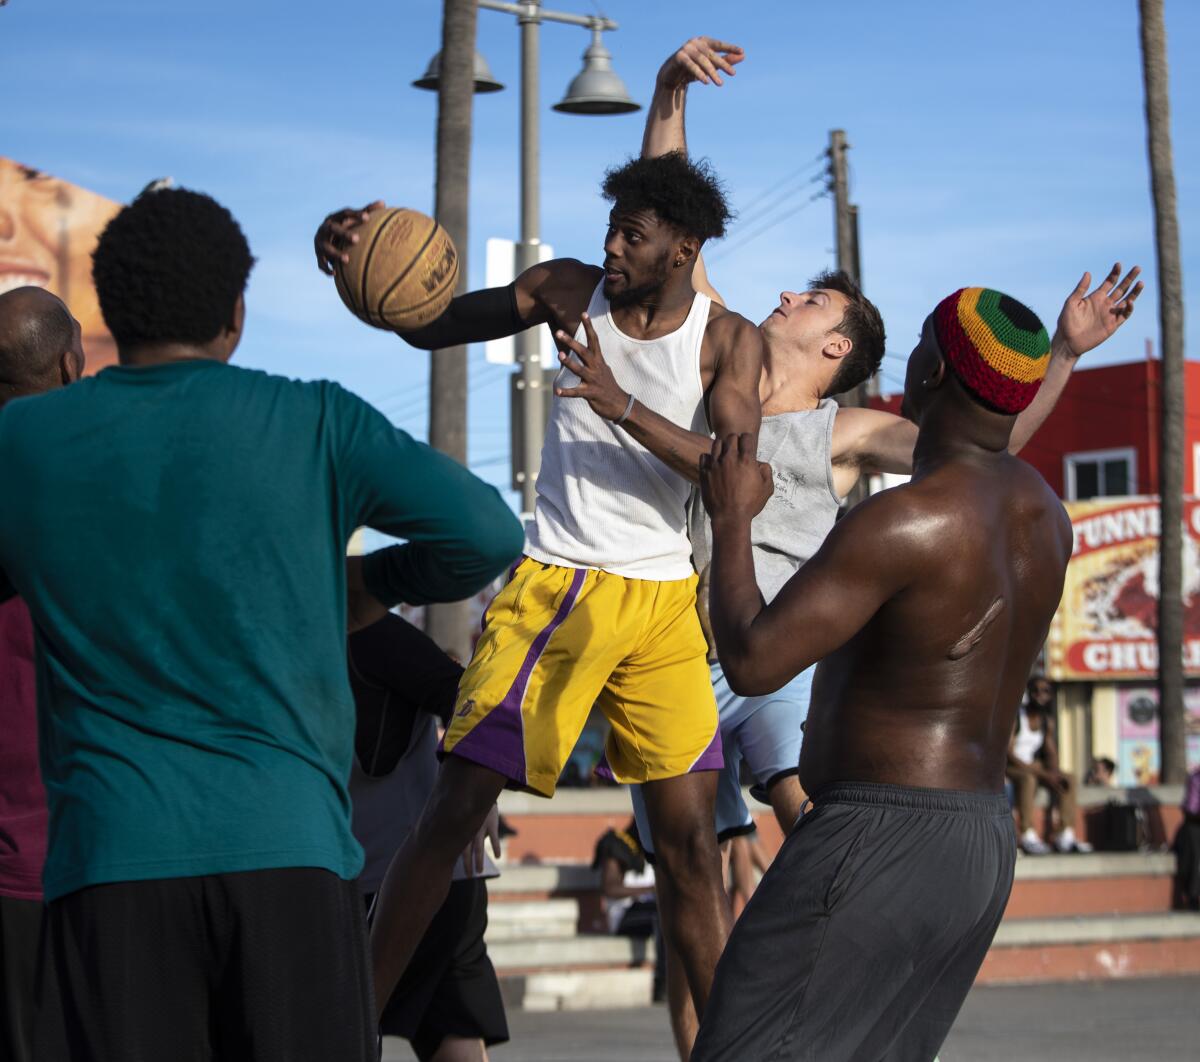 John Lackey, 20, of Long Beach, comes down with a rebound during a pickup game on Friday in Venice Beach.